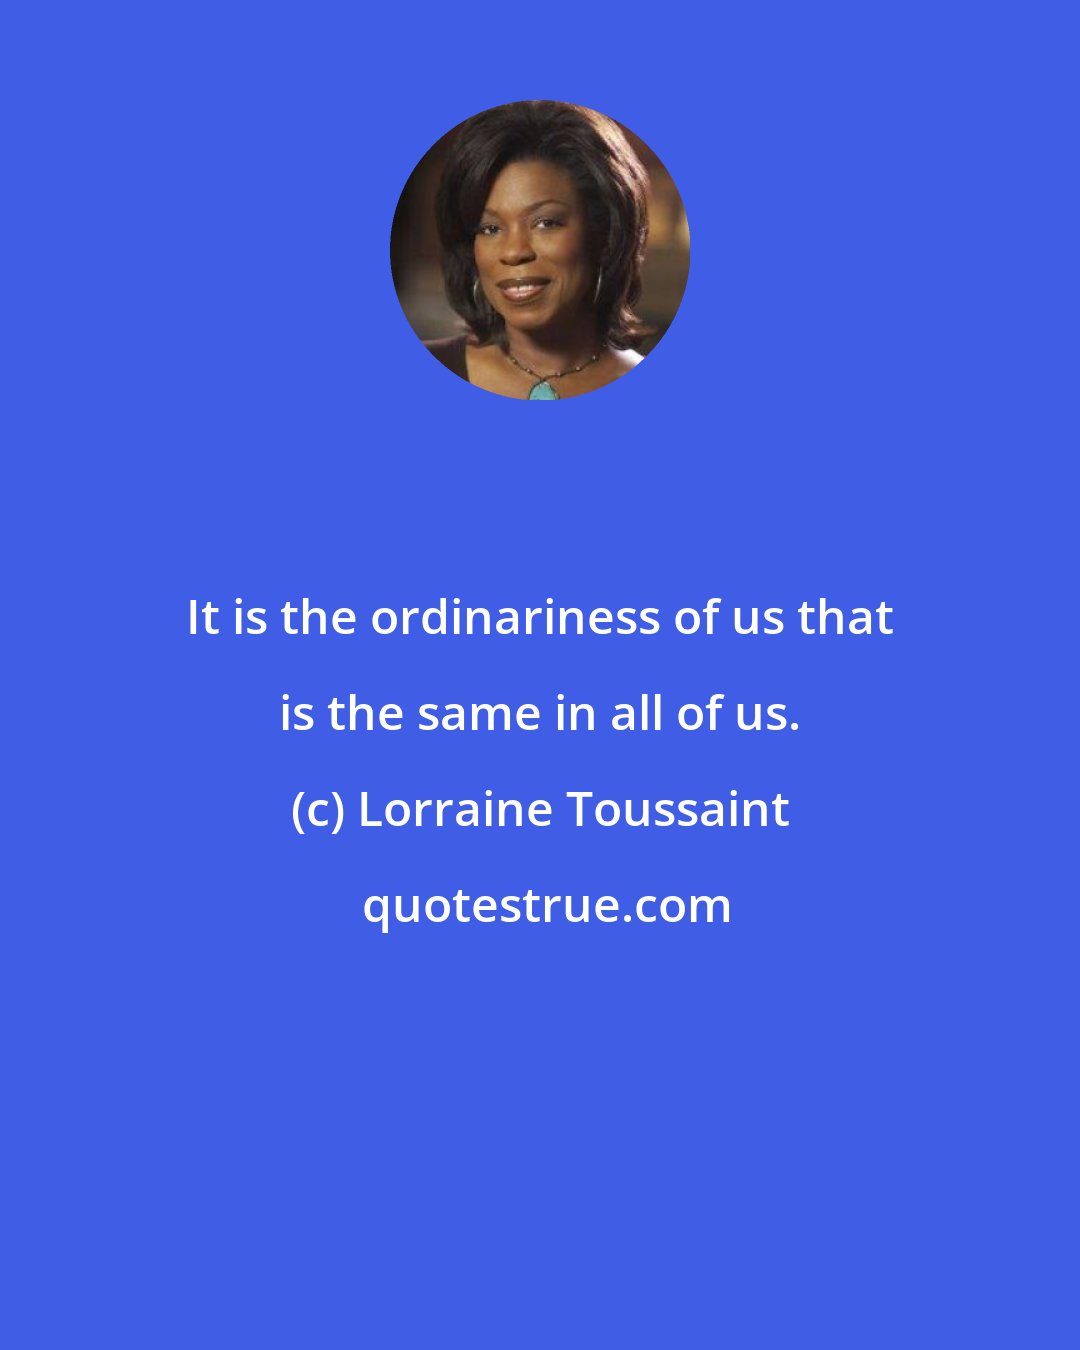 Lorraine Toussaint: It is the ordinariness of us that is the same in all of us.